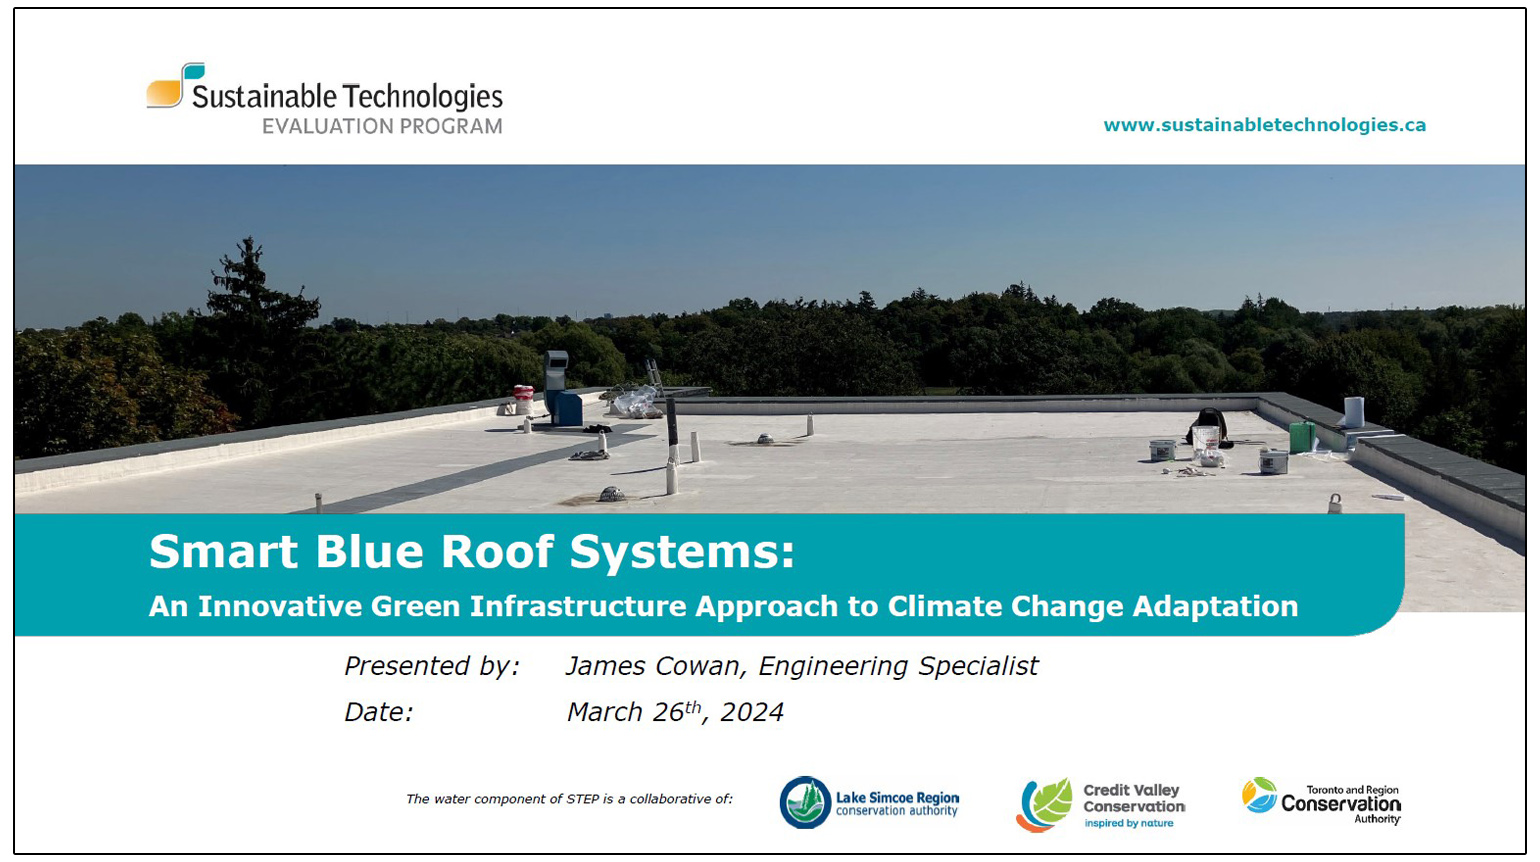 Smart Blue Roof Systems - An Innovative Green Infrastructure Approach to Climate Change Adaptation - presented by James Cowan